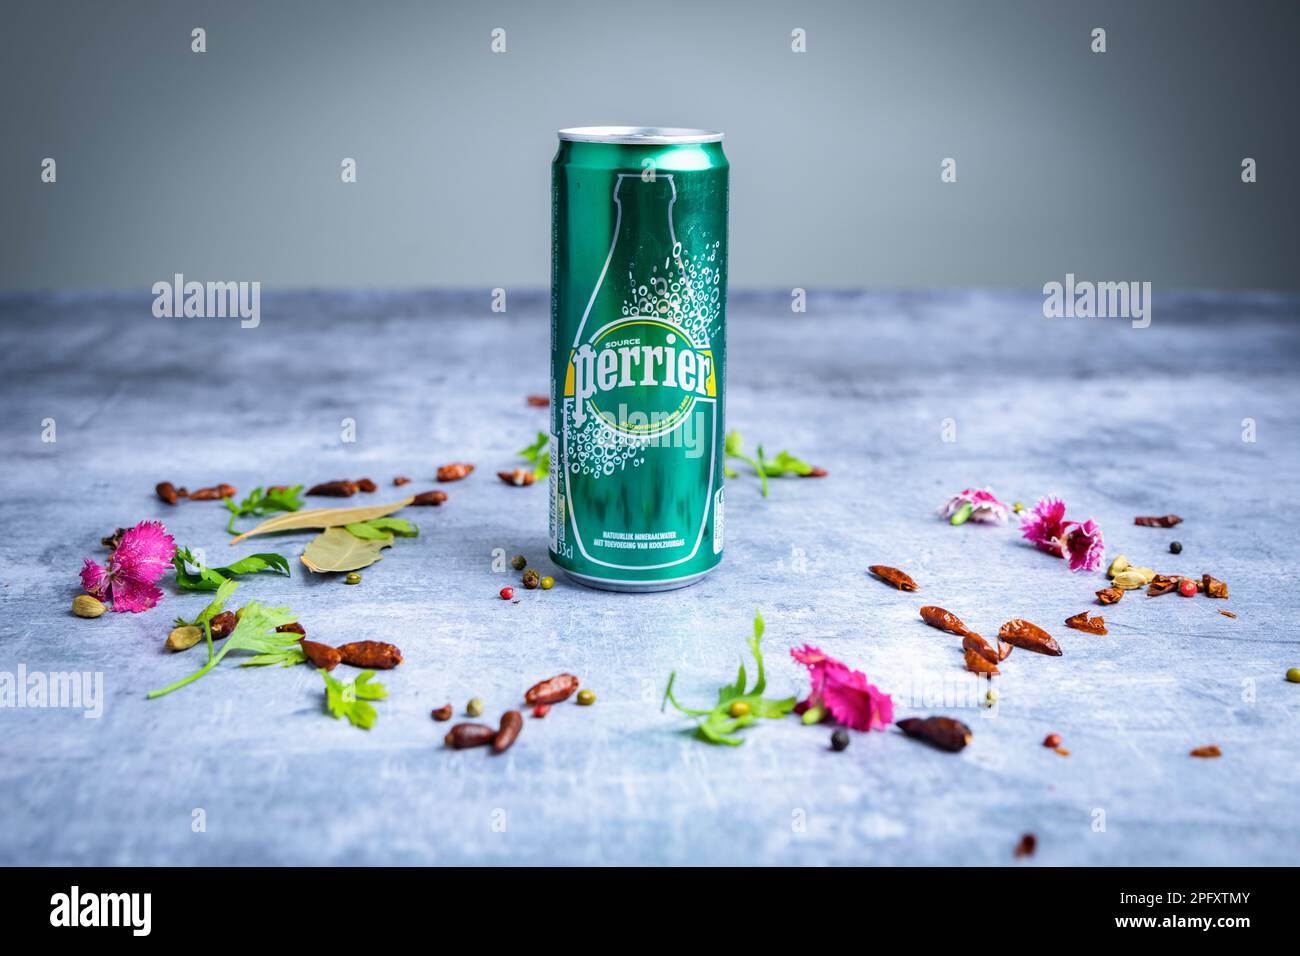 Bottle of Perrier water ready to be drunk Stock Photo